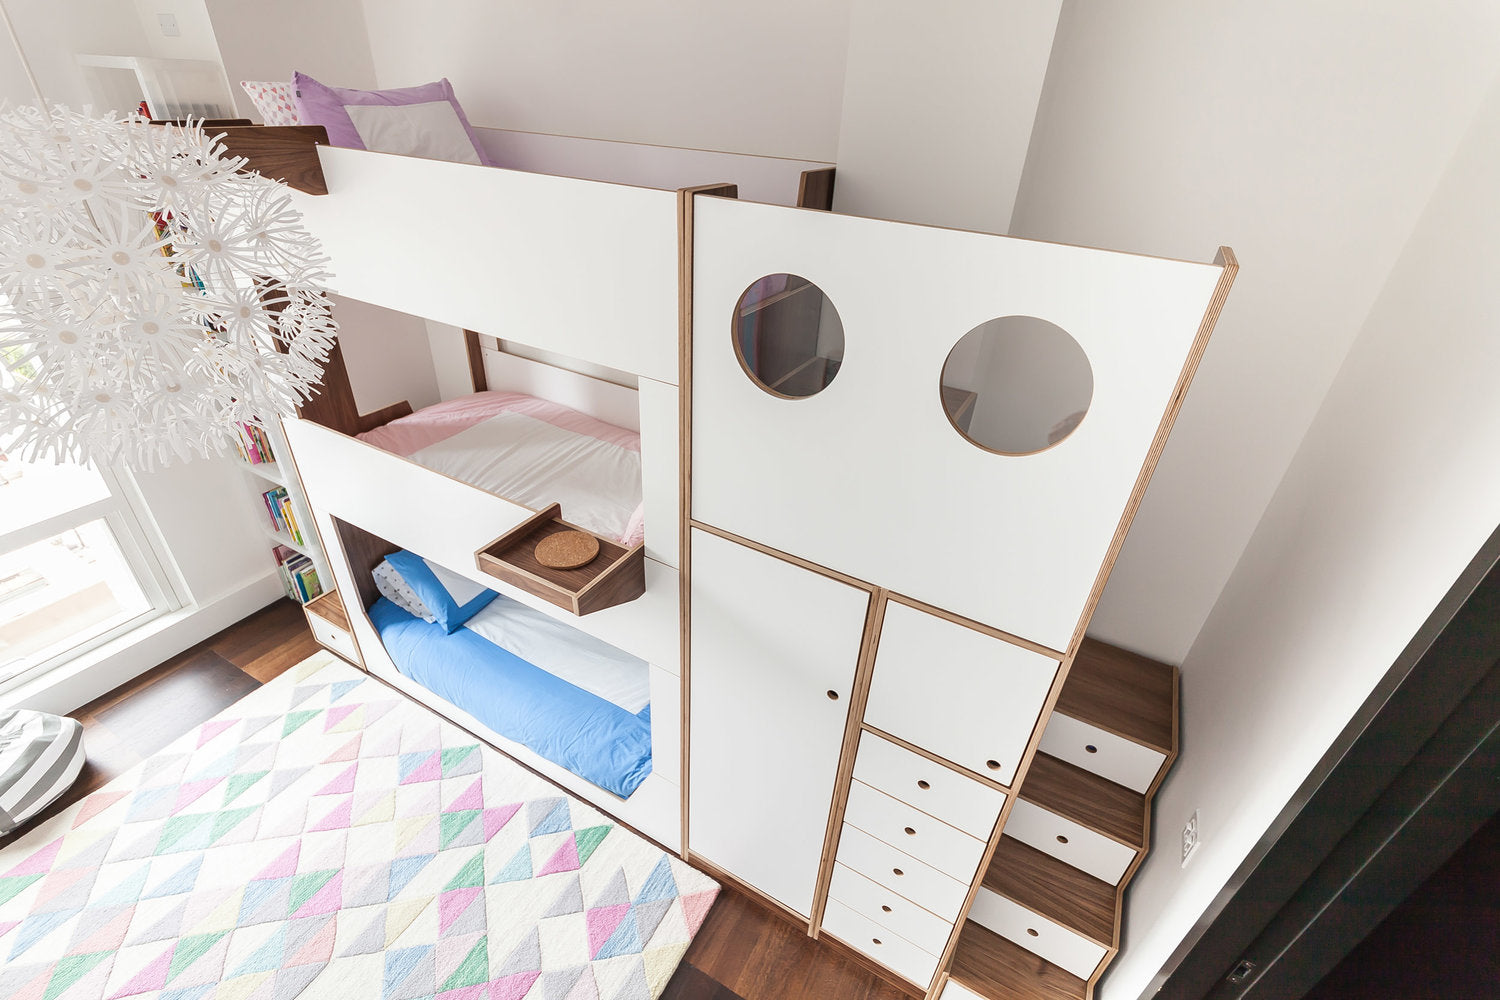 Modern bunk bed with storage, circular windows in a bright, airy children’s room.